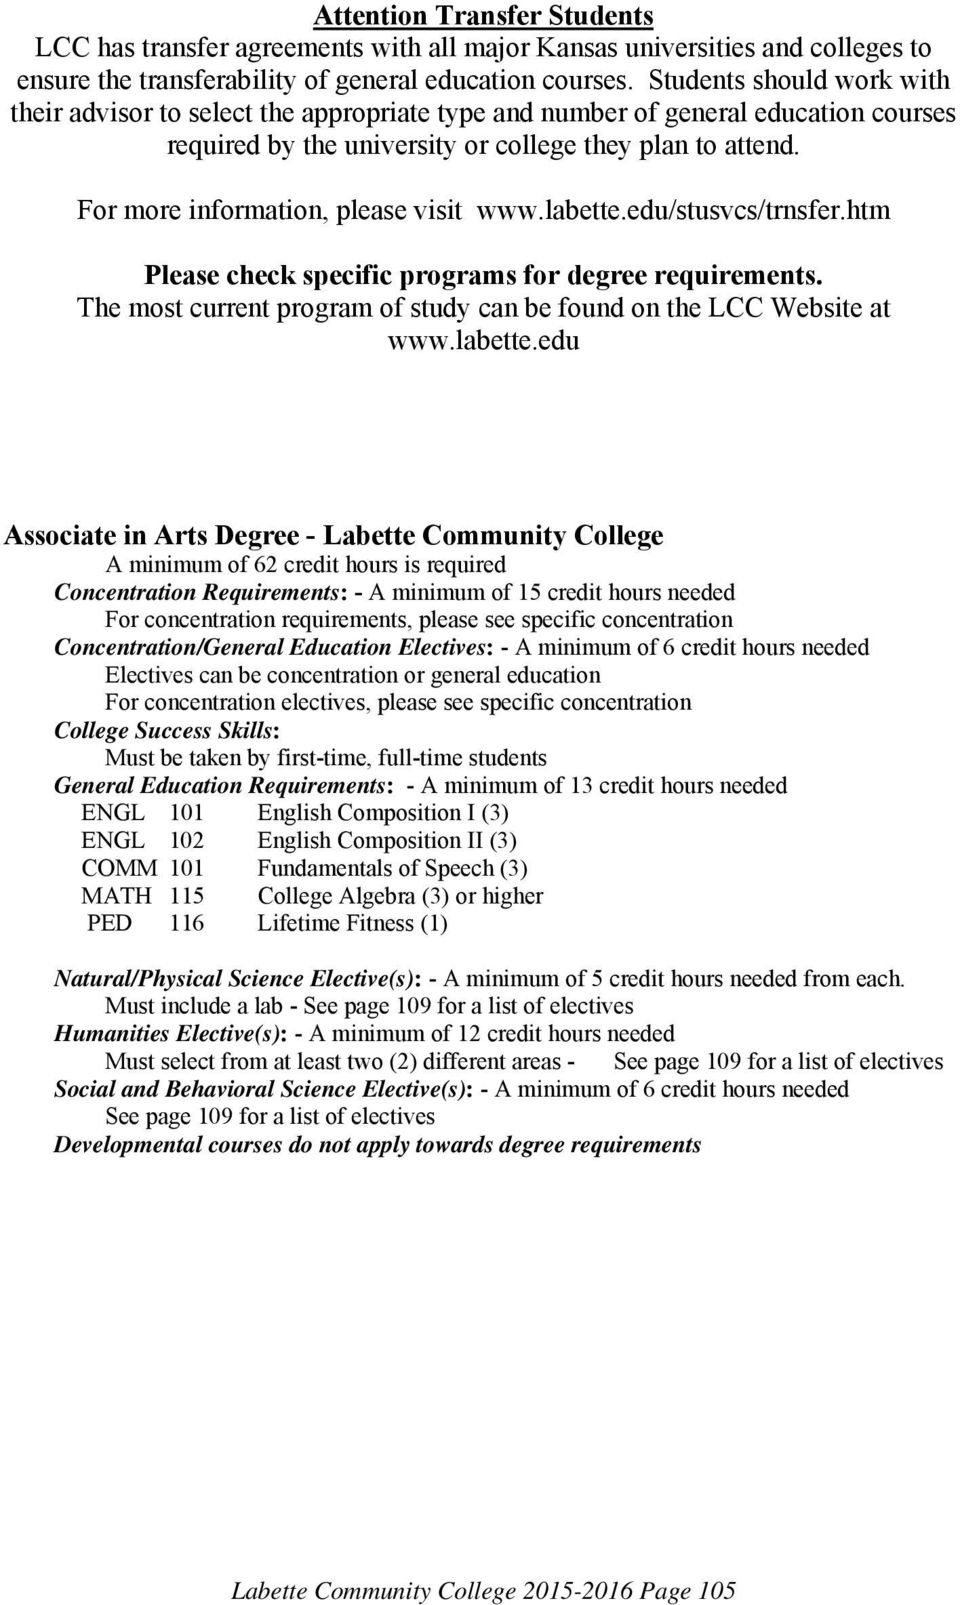 For more information, please visit www.labette.edu/stusvcs/trnsfer.htm Please check specific programs for degree requirements. The most current program of study can be found on the LCC Website at www.